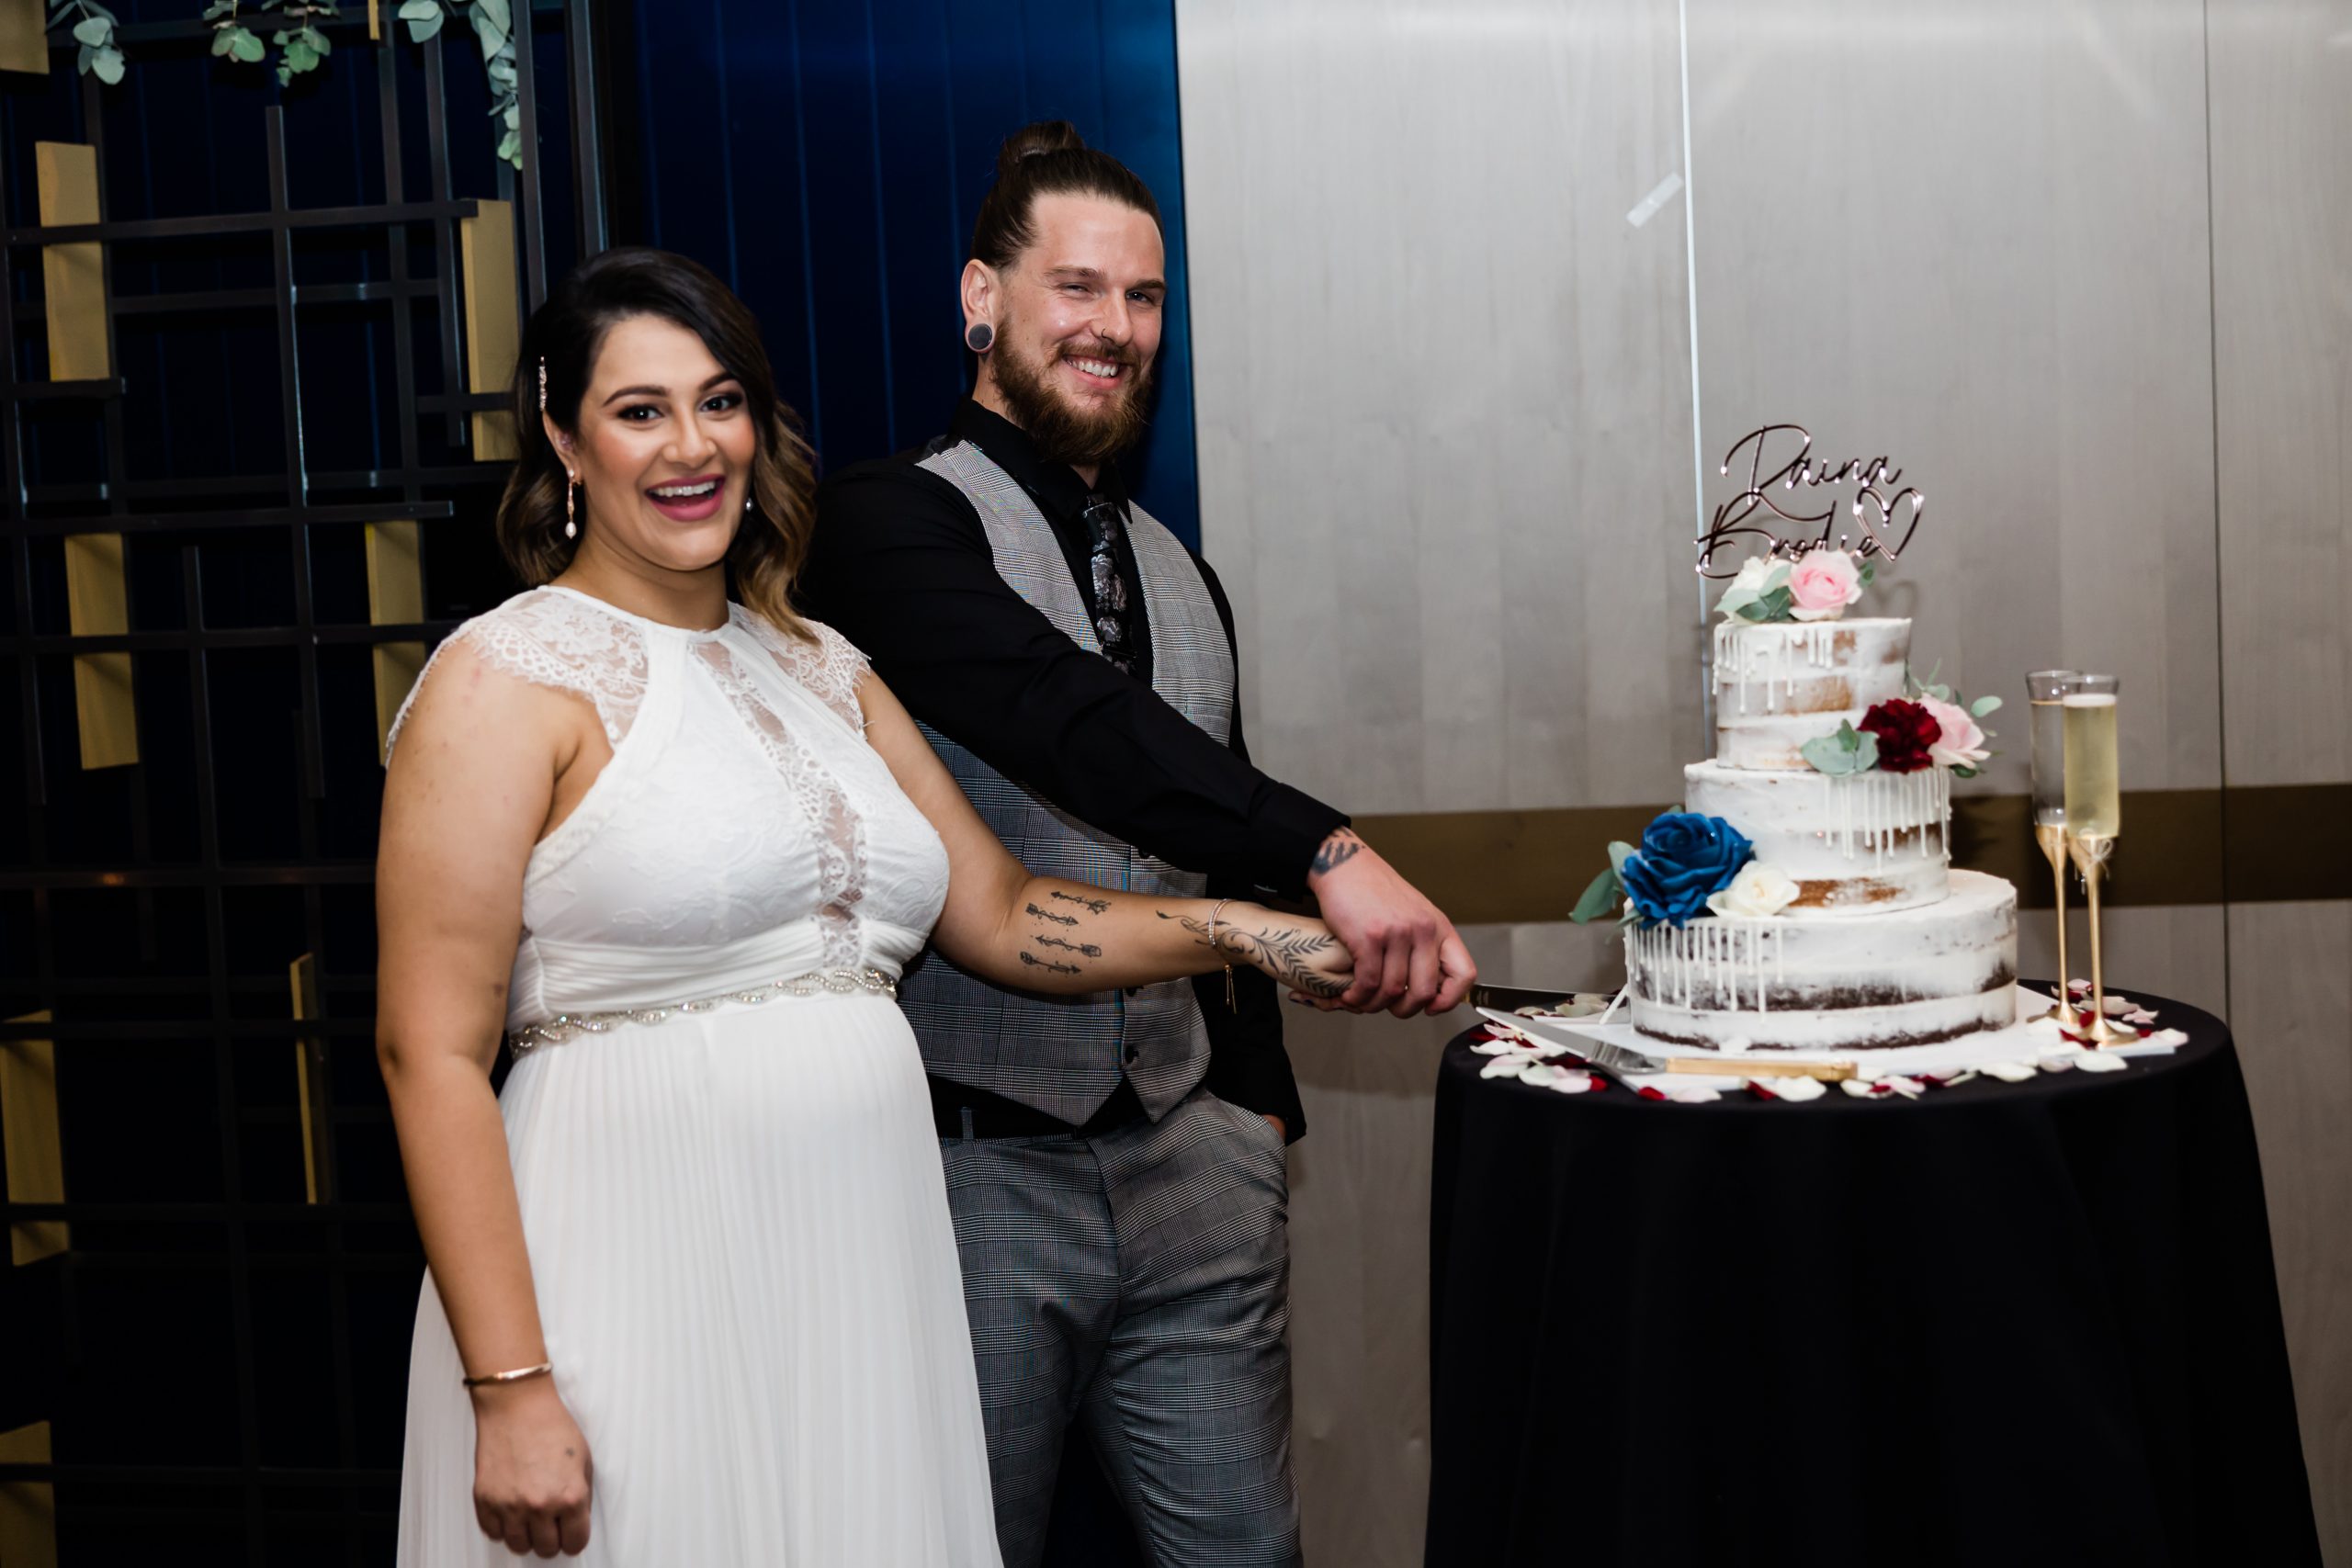 A bride and groom smiling while cutting a cake together